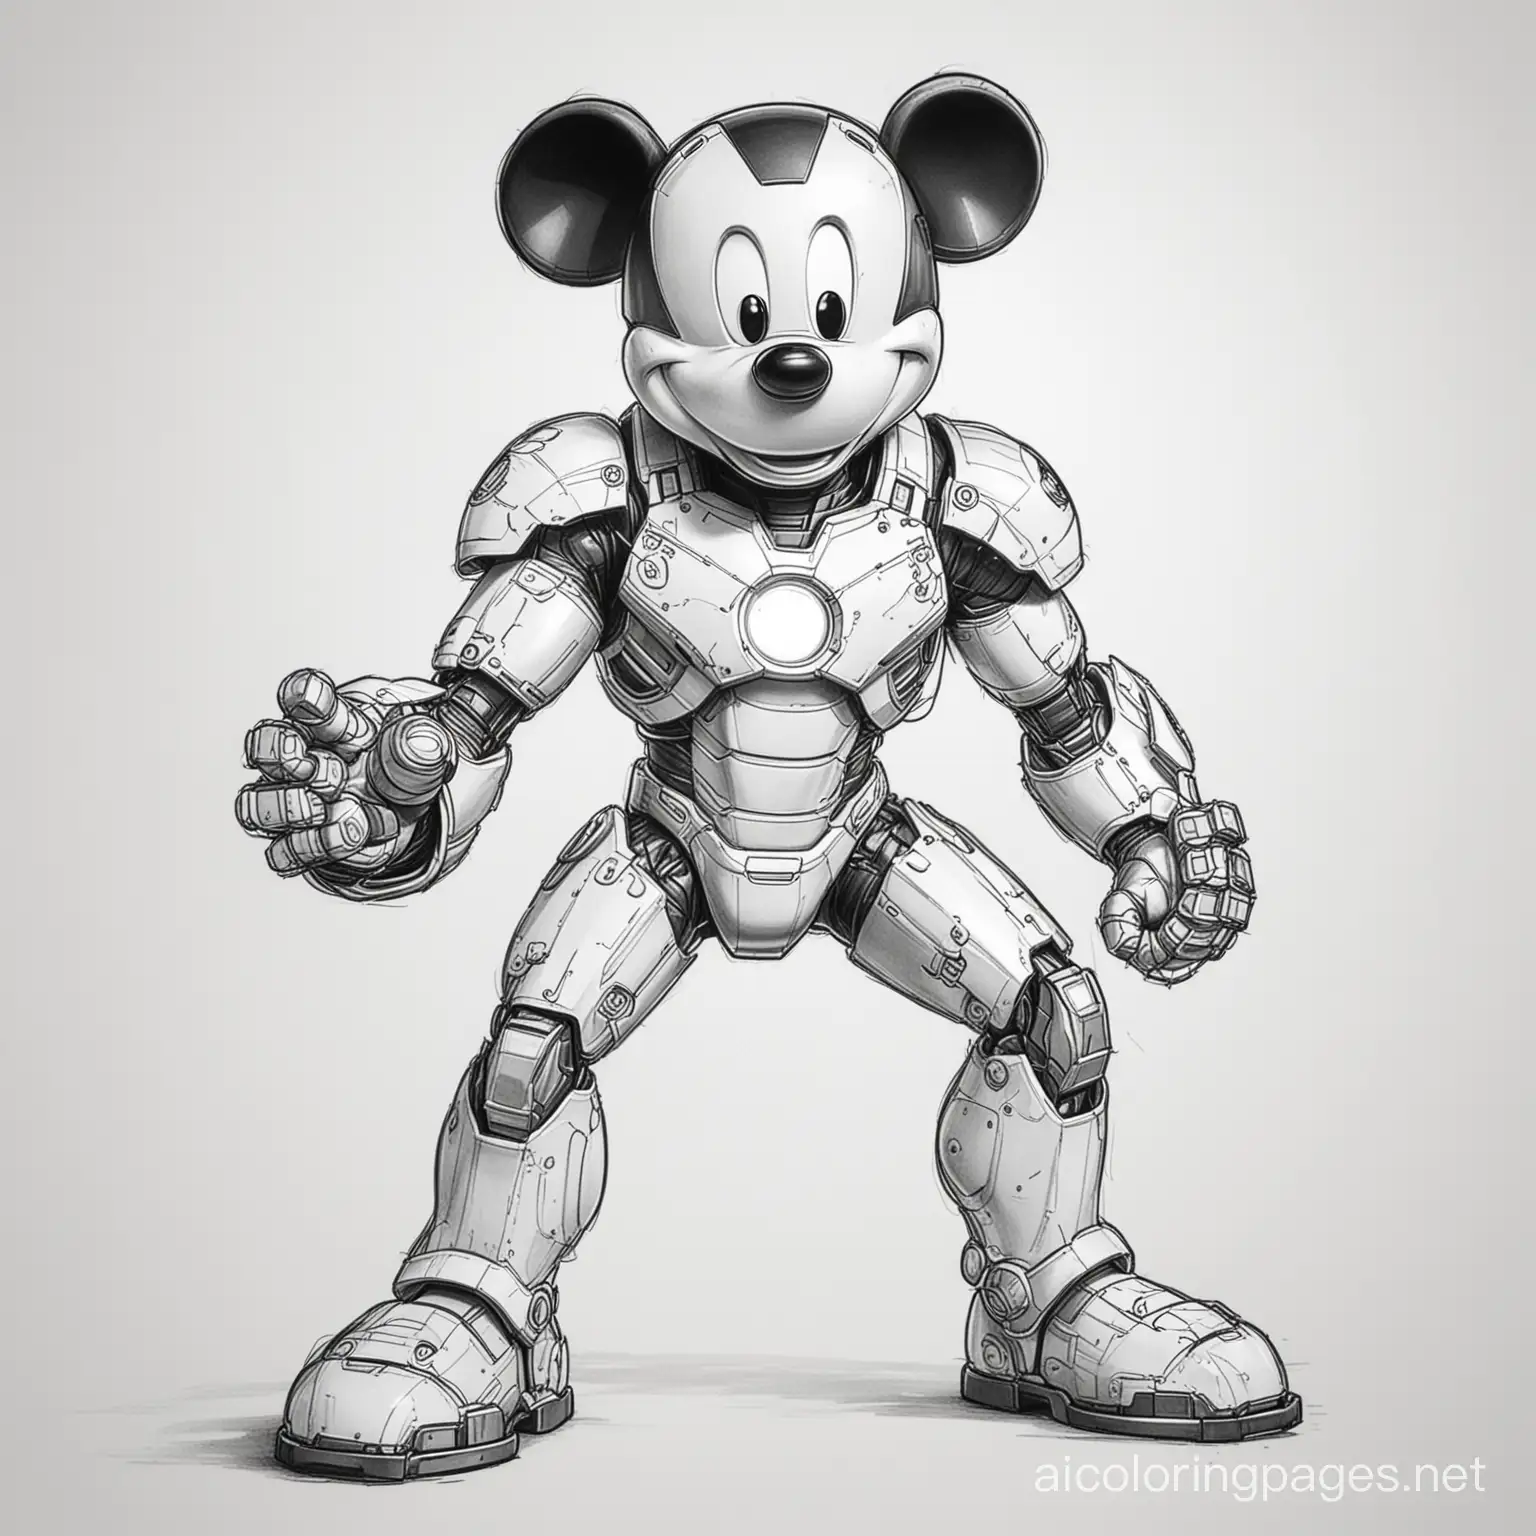 Micky Mouse and Iron Man, Coloring Page, black and white, line art, white background, Simplicity, Ample White Space. The background of the coloring page is plain white to make it easy for young children to color within the lines. The outlines of all the subjects are easy to distinguish, making it simple for kids to color without too much difficulty